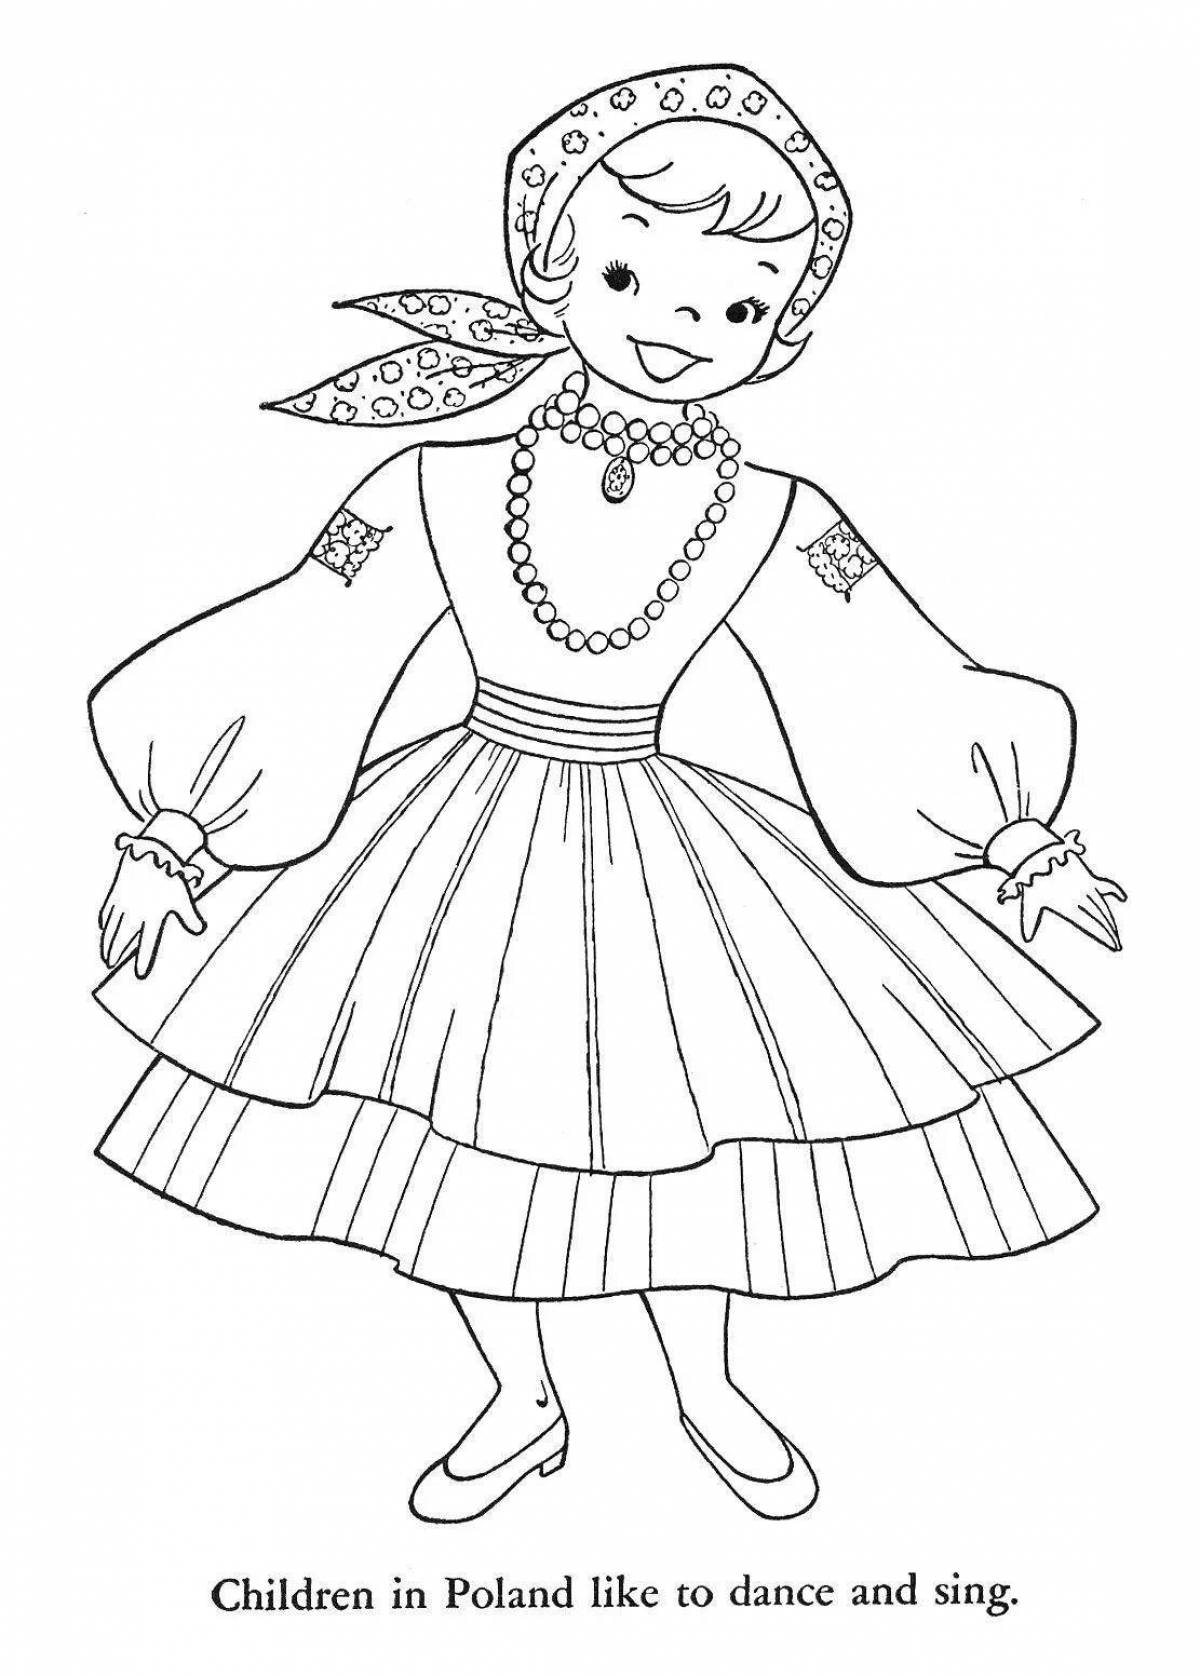 Merry Russian folk clothes coloring pages for children